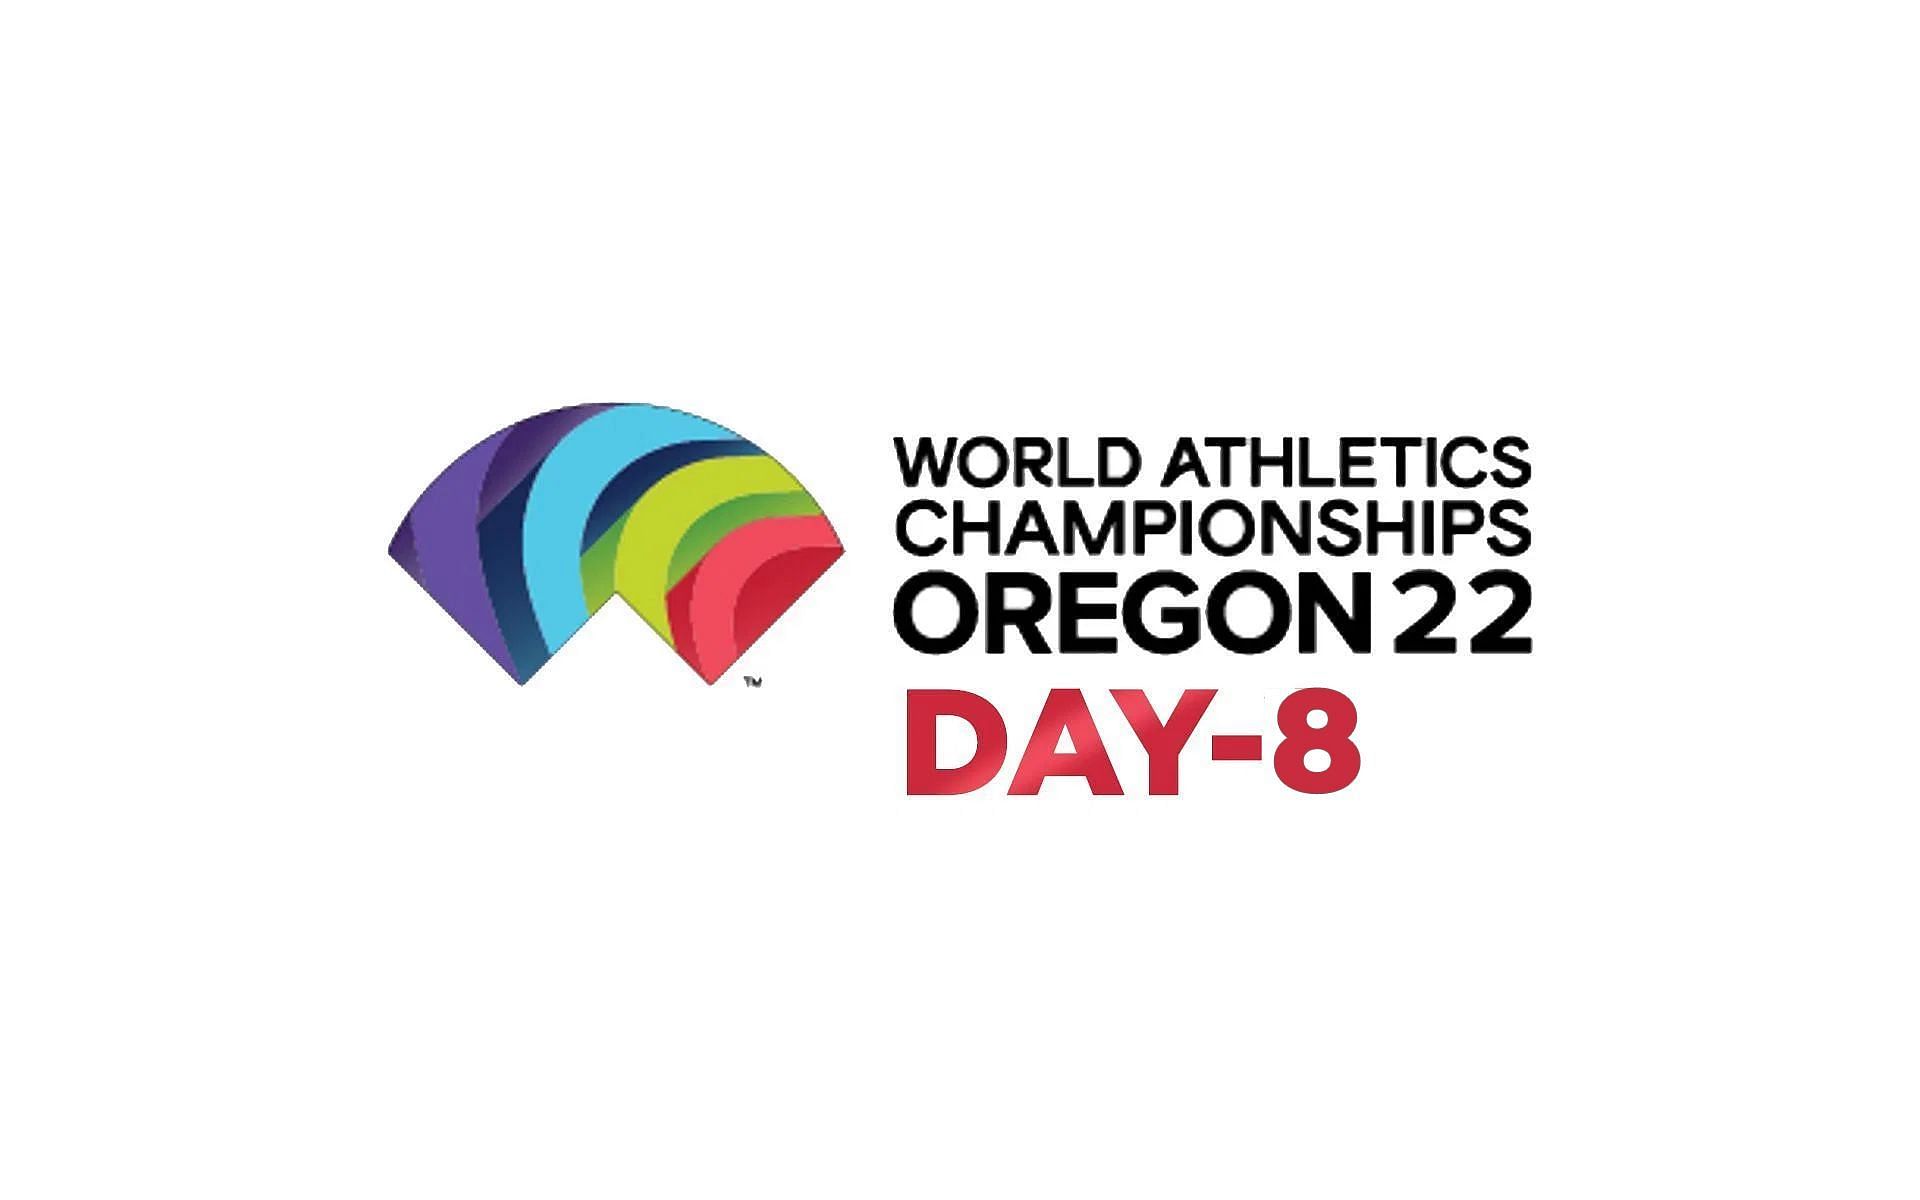 World Athletics Championships 2022 Day 8 schedule Events, timings, livestream links, and more